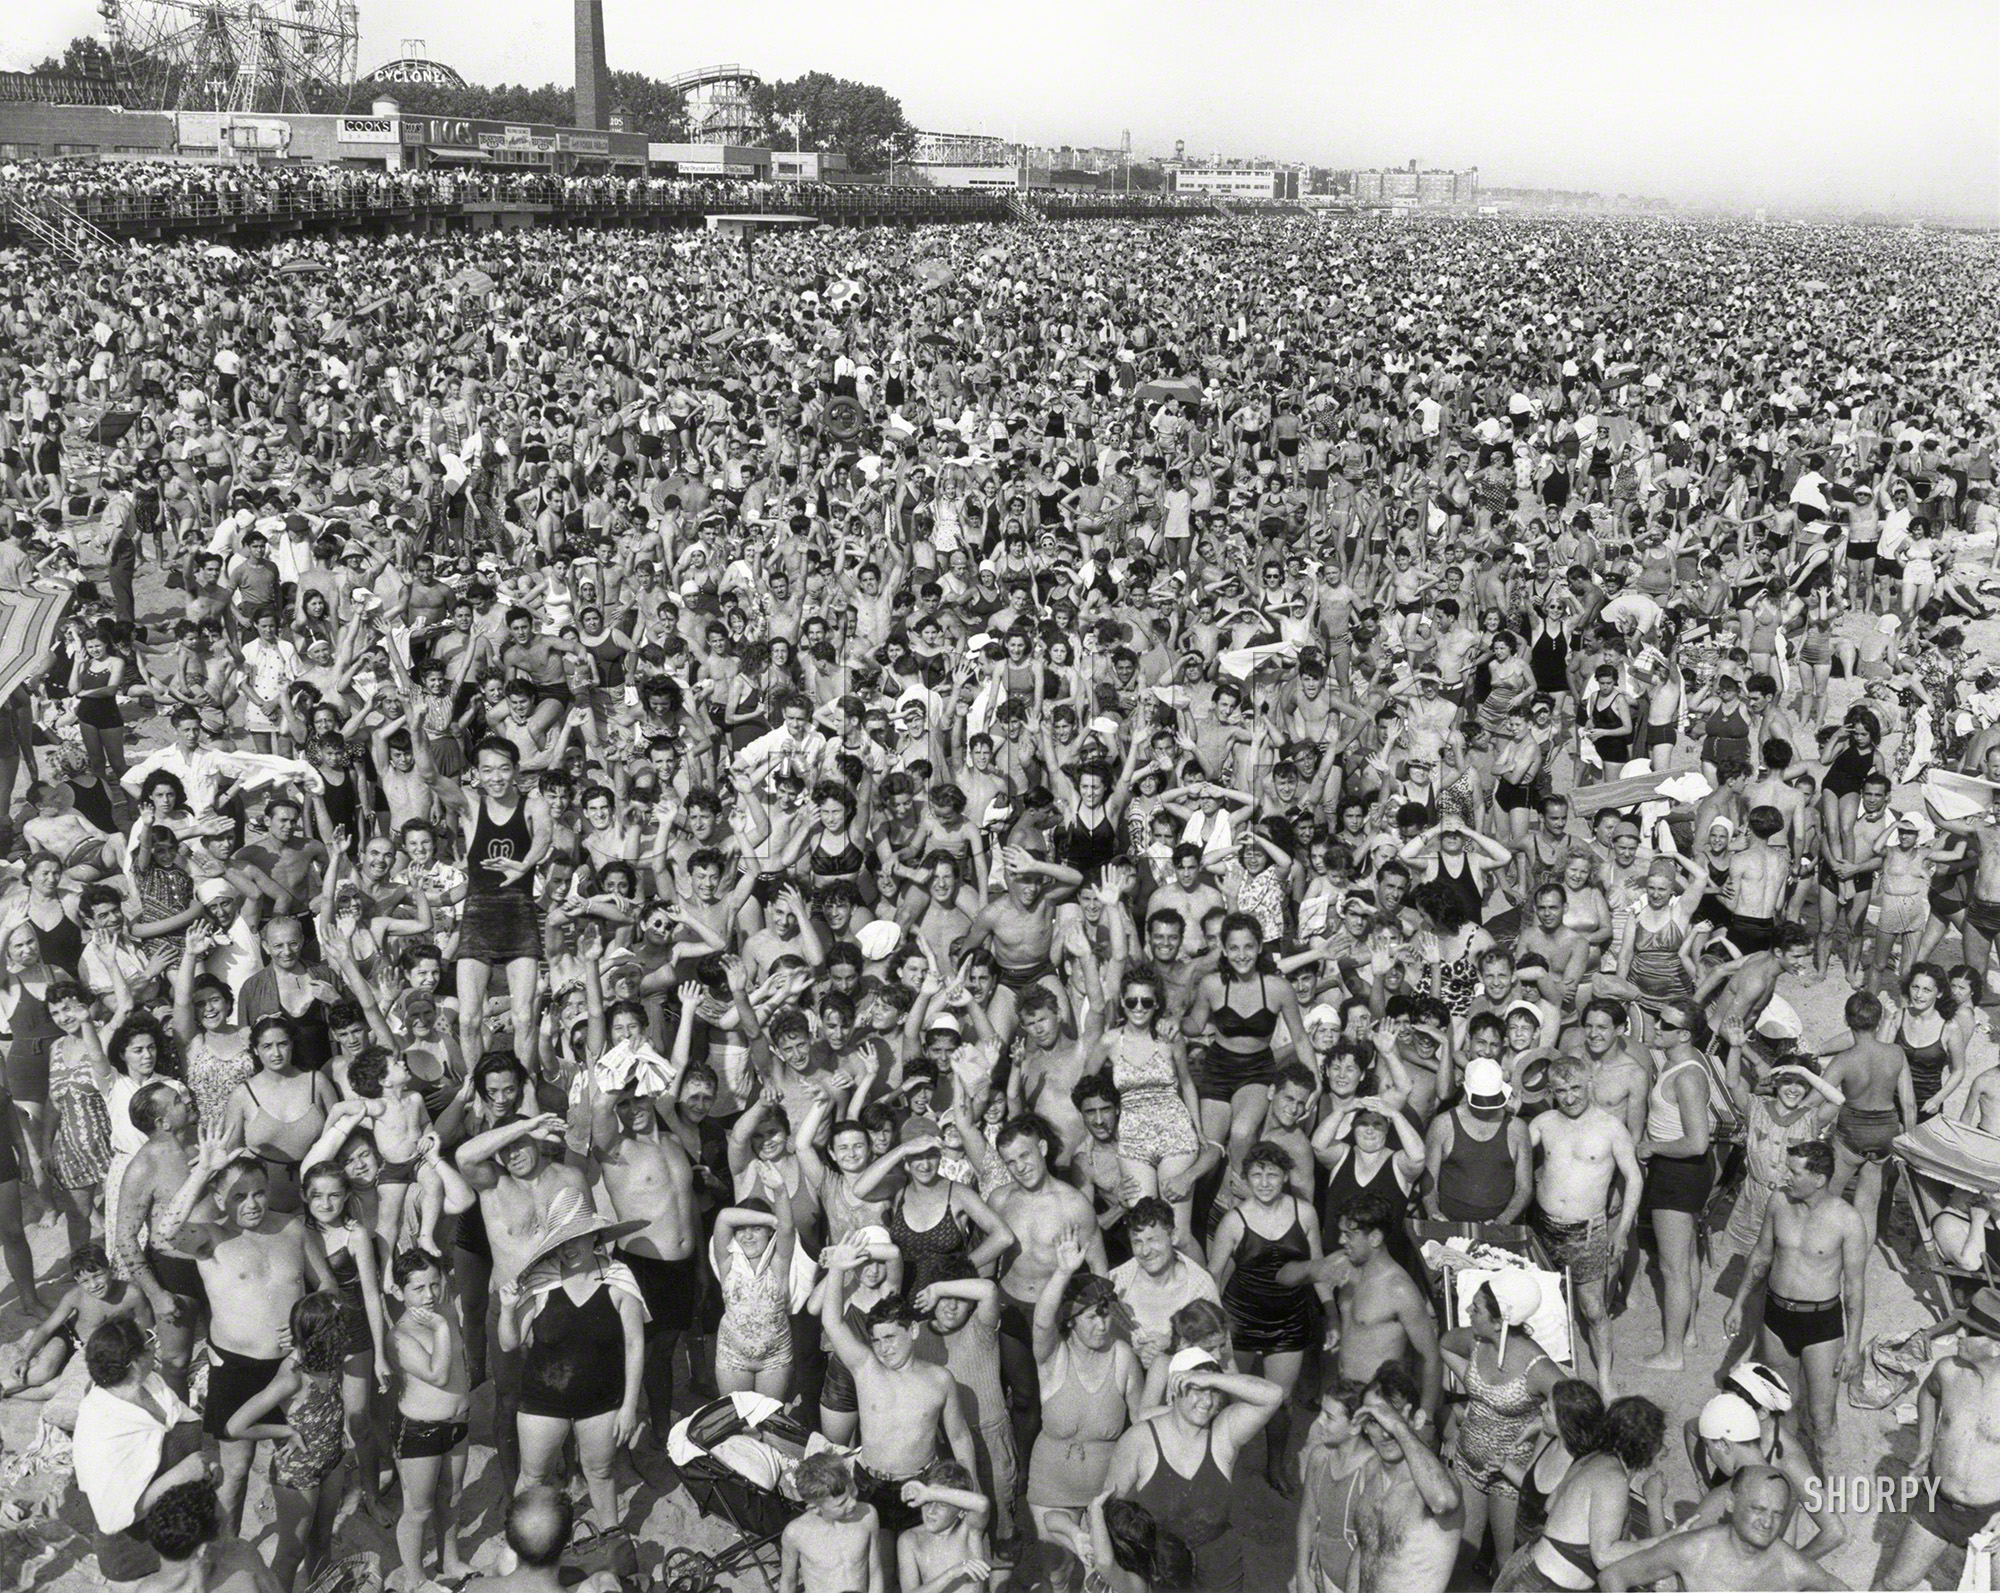 New York, 1940. "Crowd at Coney Island." Gelatin silver print by Arthur Fellig, the press photographer known as Weegee. View full size.